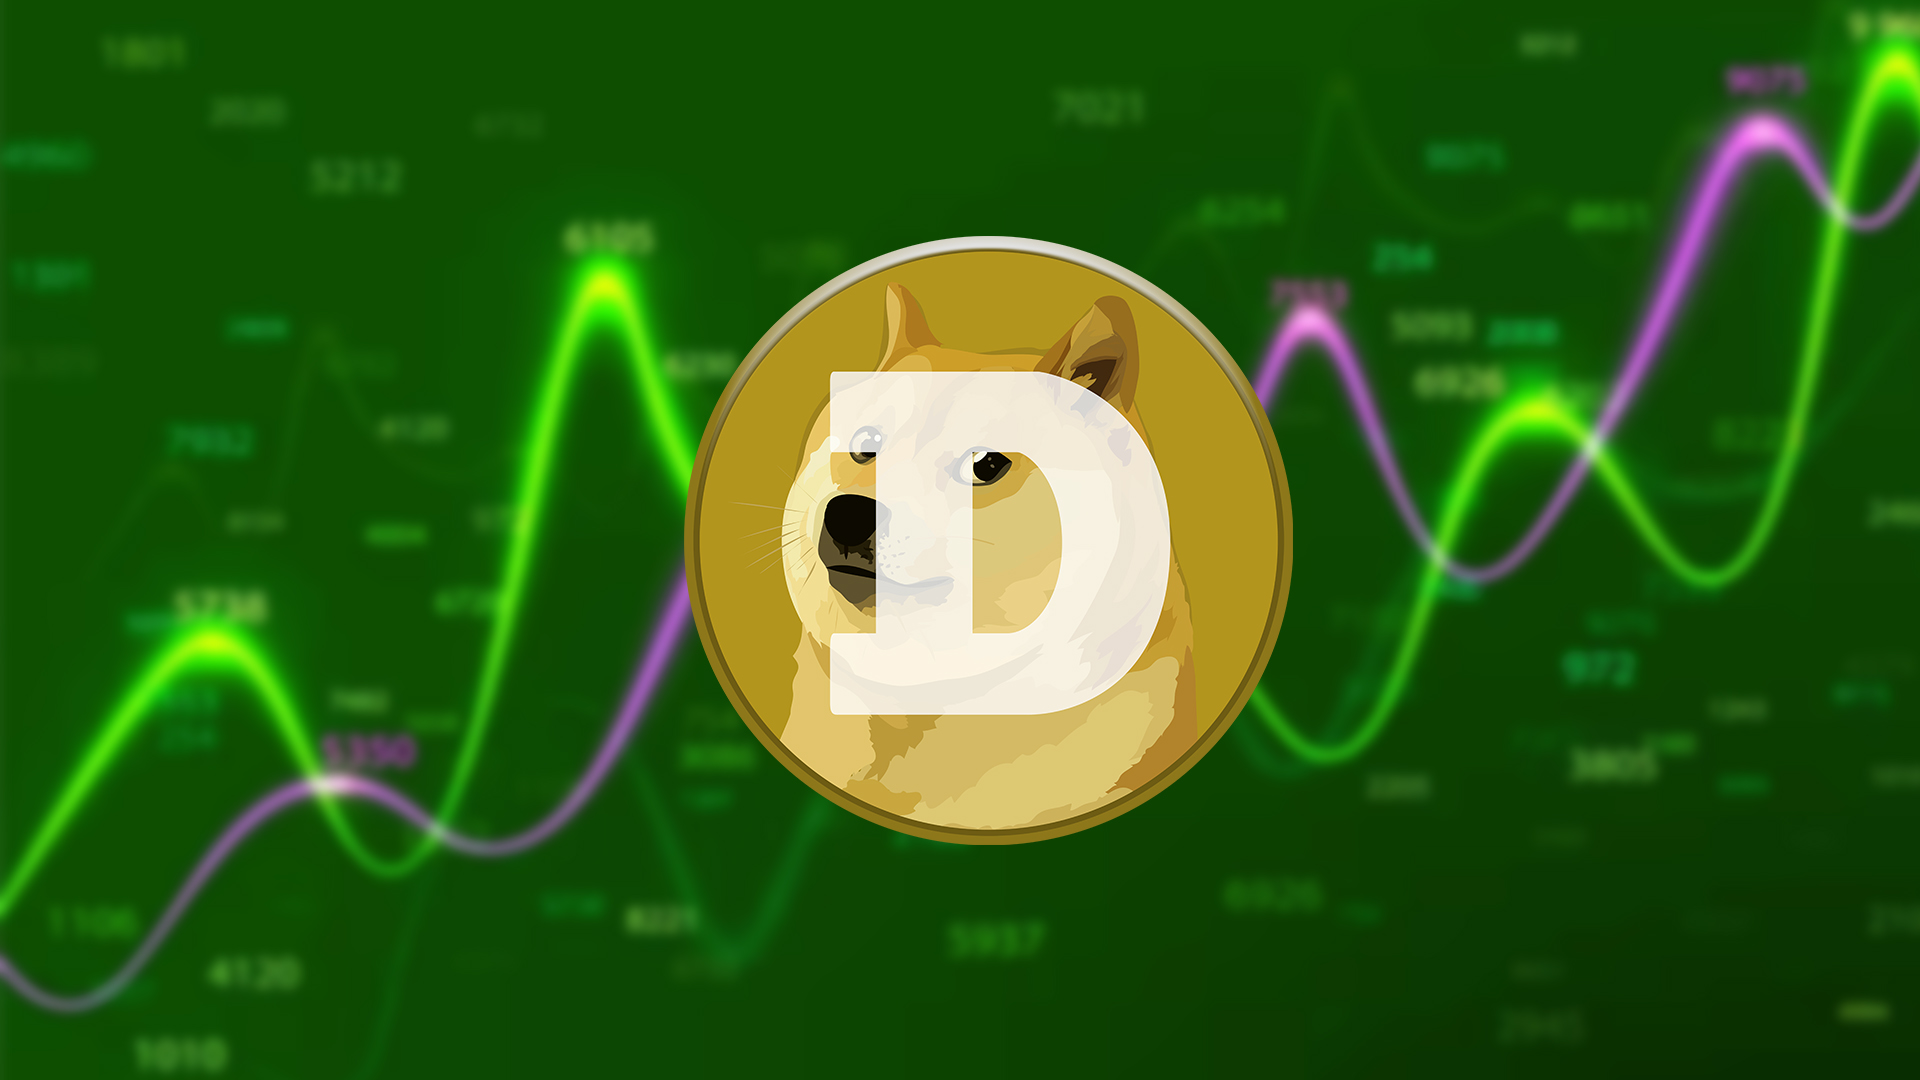 Dogecoin Price Prediction: Will DOGE Escalate To $0.10500 Soon?